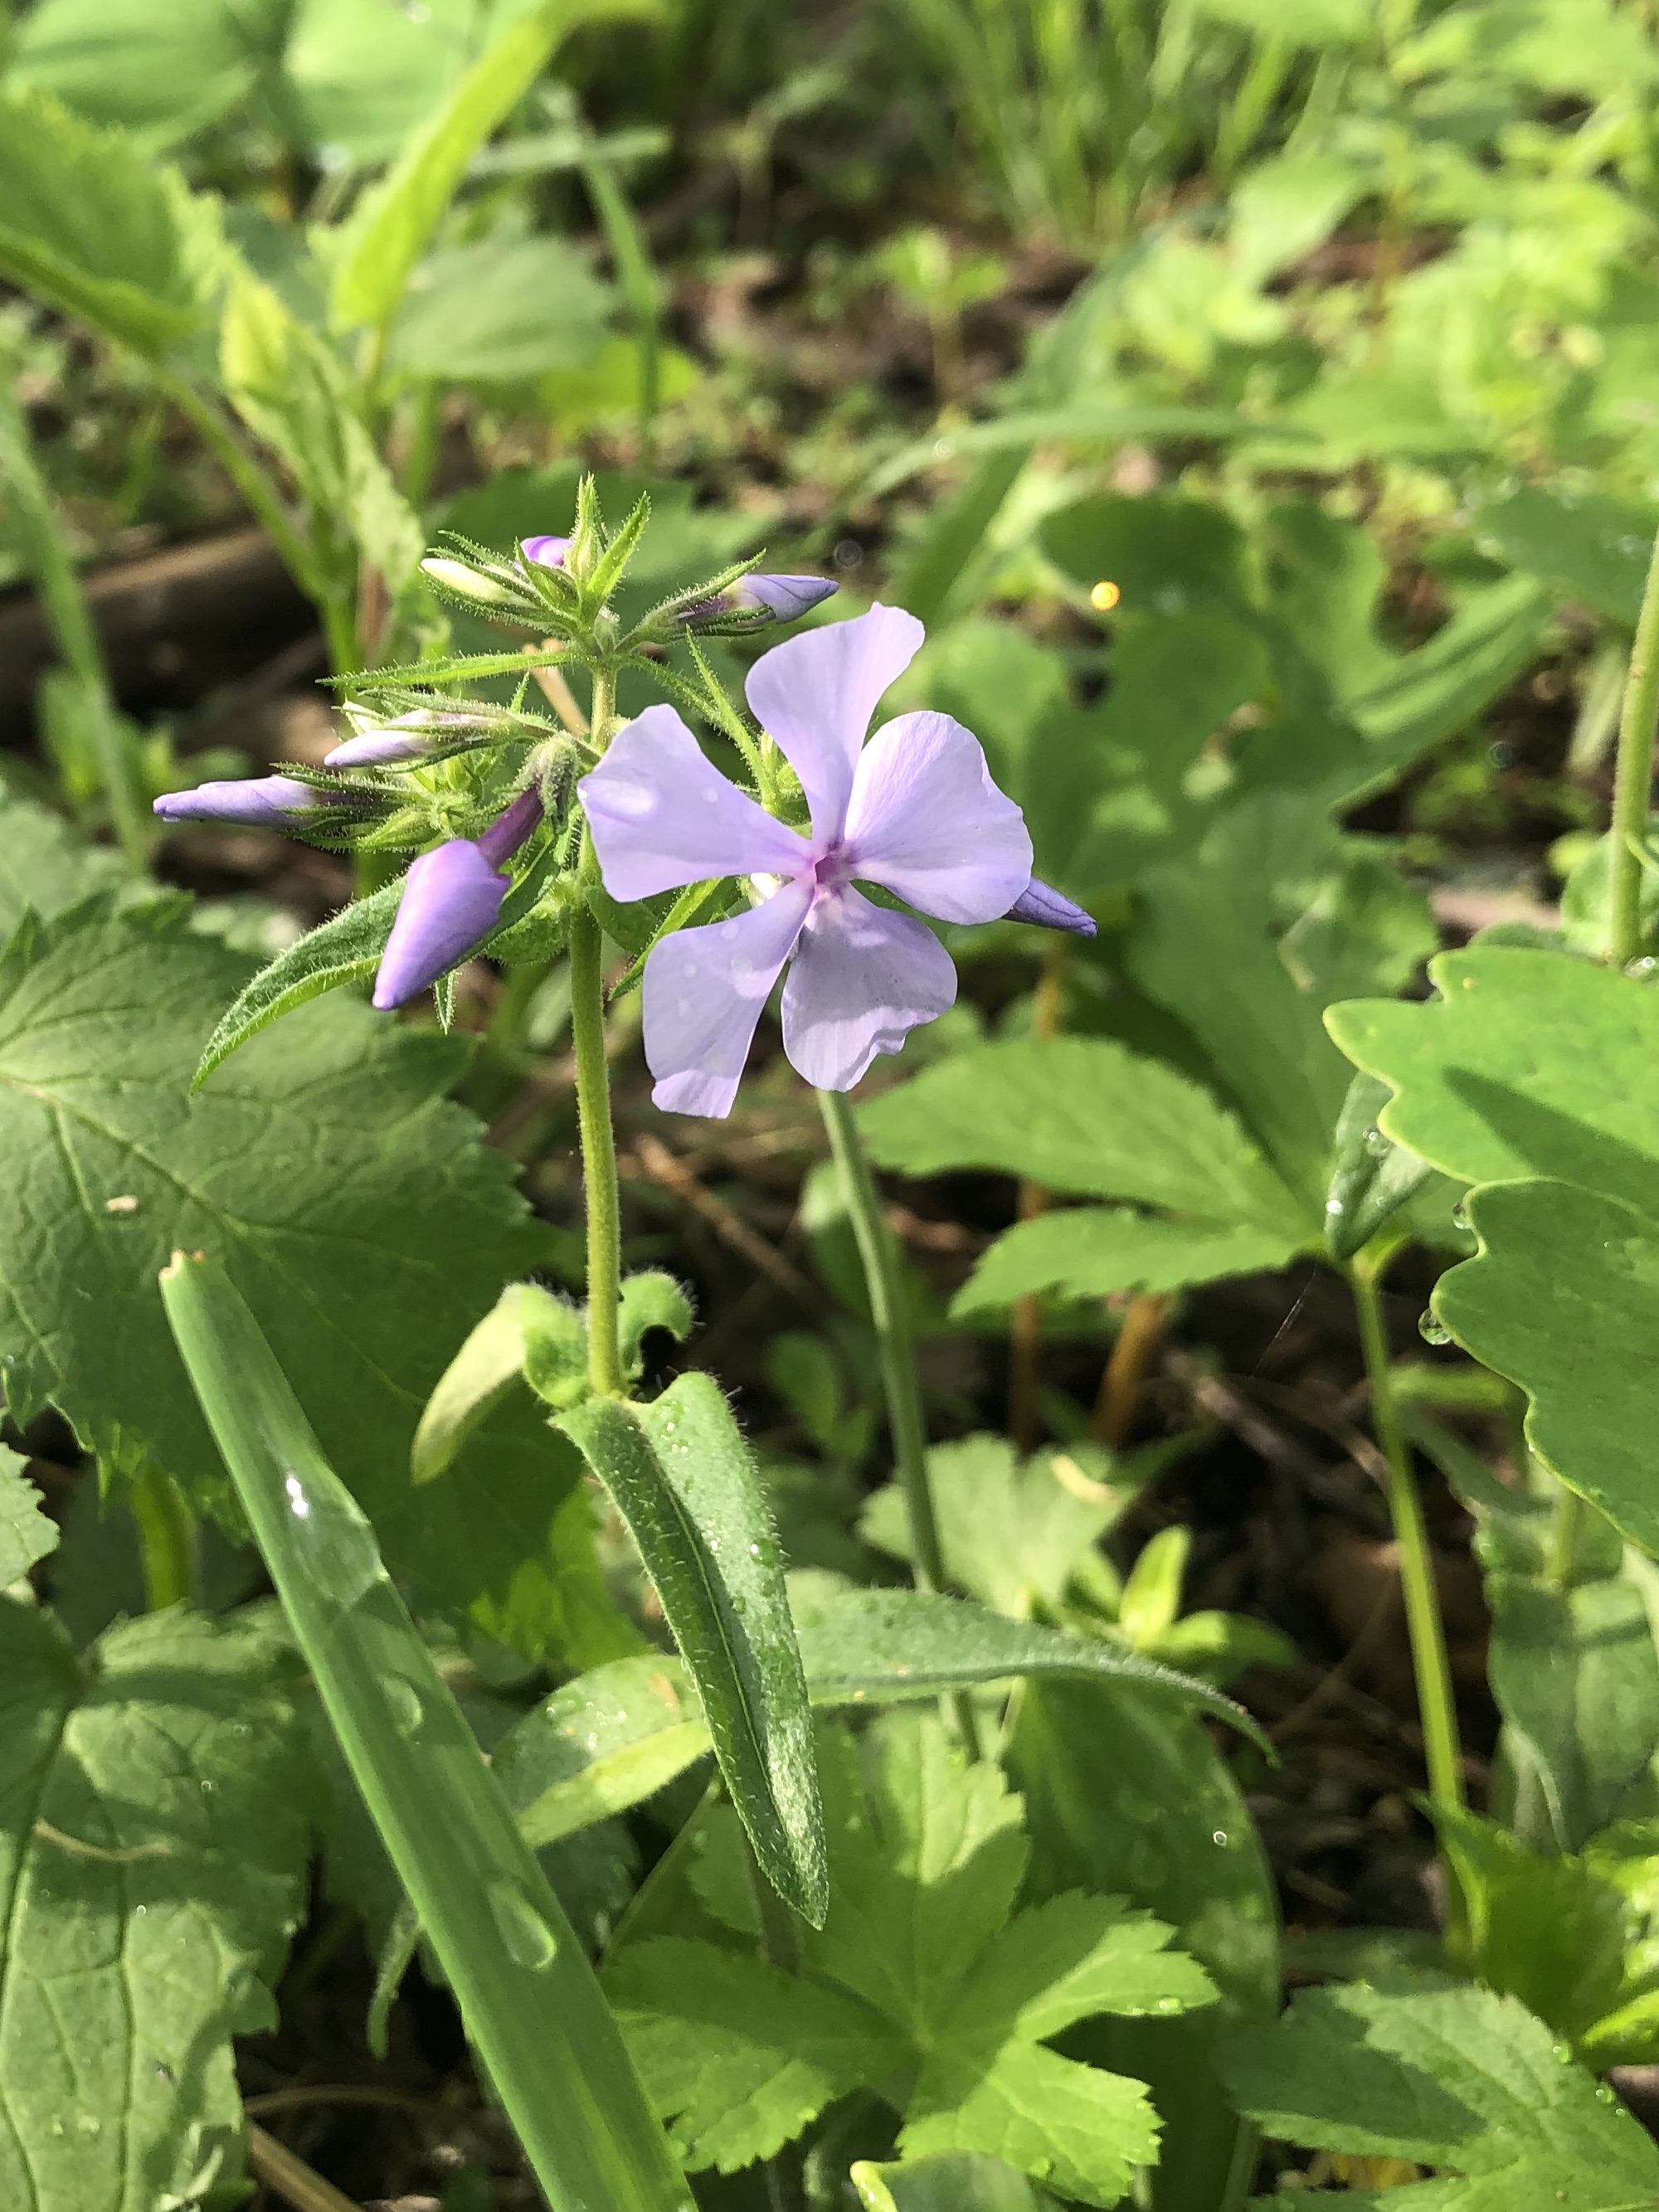 Woodland Phlox by Council Ring in Oak Savanna in Madison, Wisconsin on May 14, 2022.